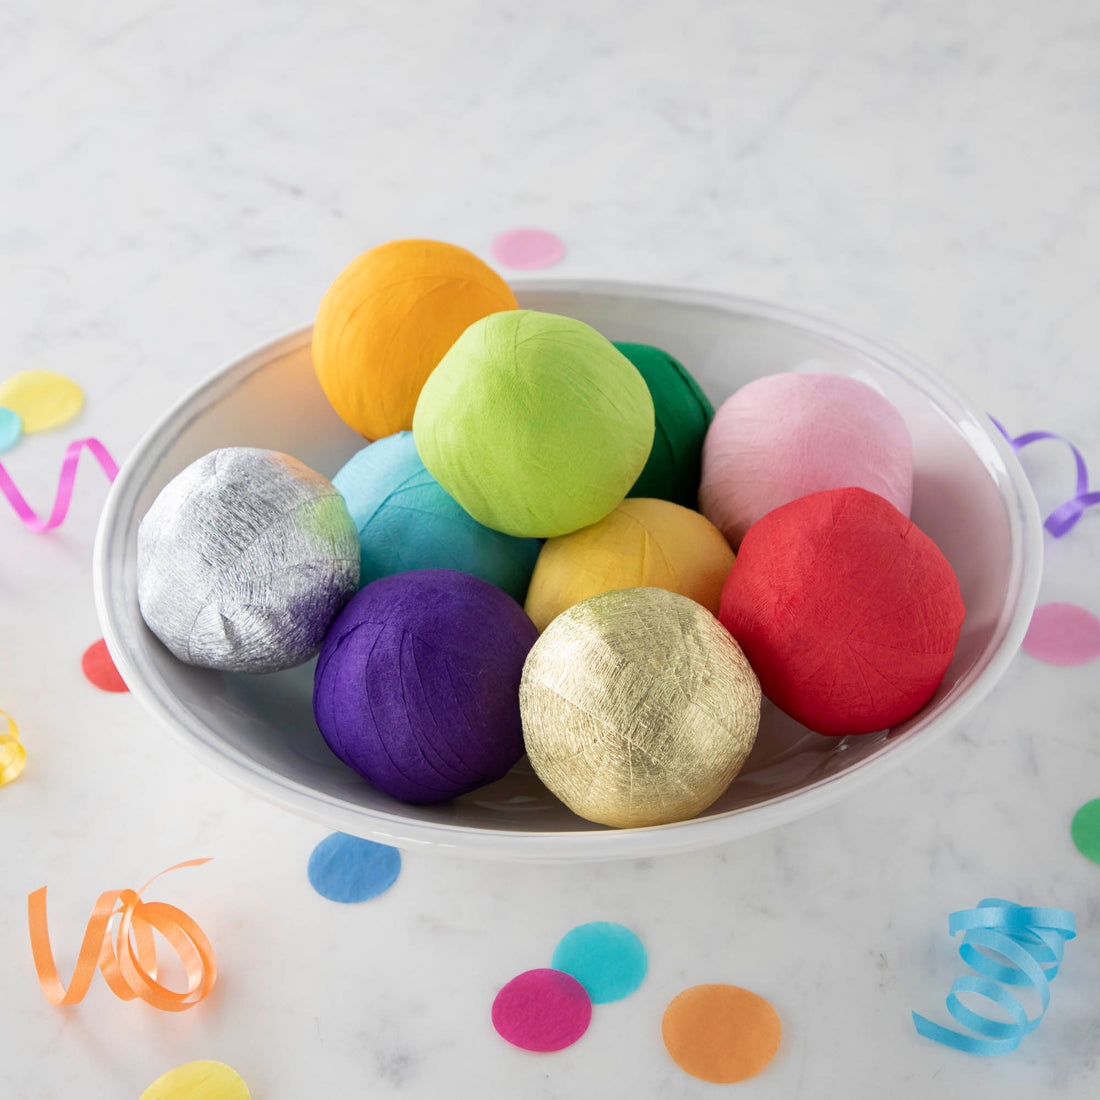 Vintage-inspired Mini Surprize Balls in a white bowl with confetti by Tops Malibu.